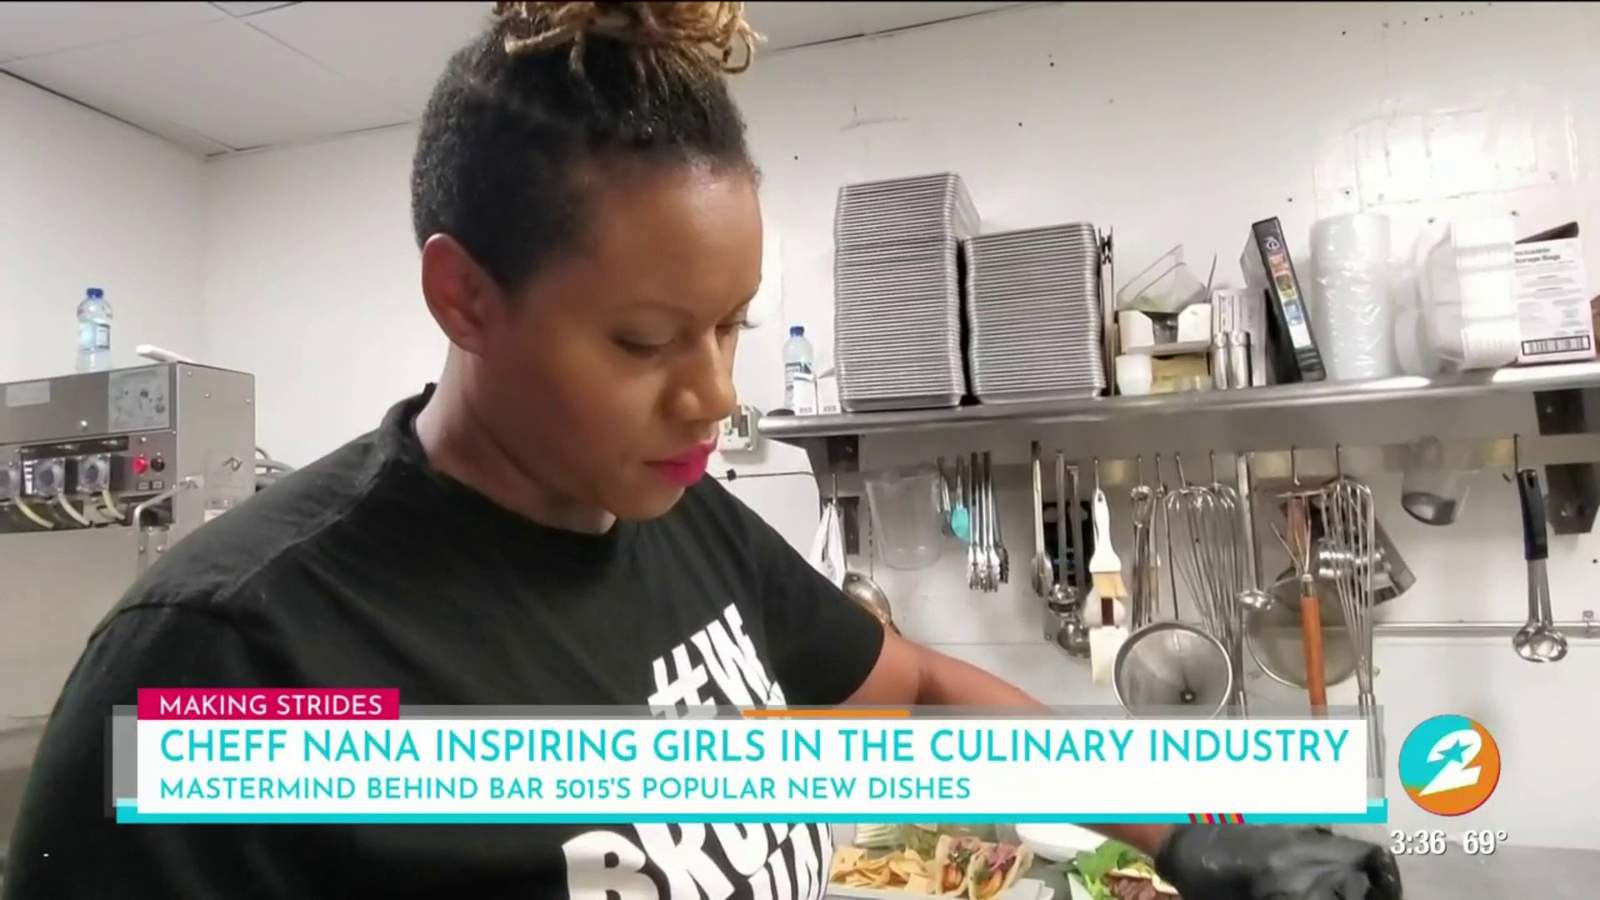 Chef Nana creating a tasty buzz in the 3rd ward with her popular new dishes